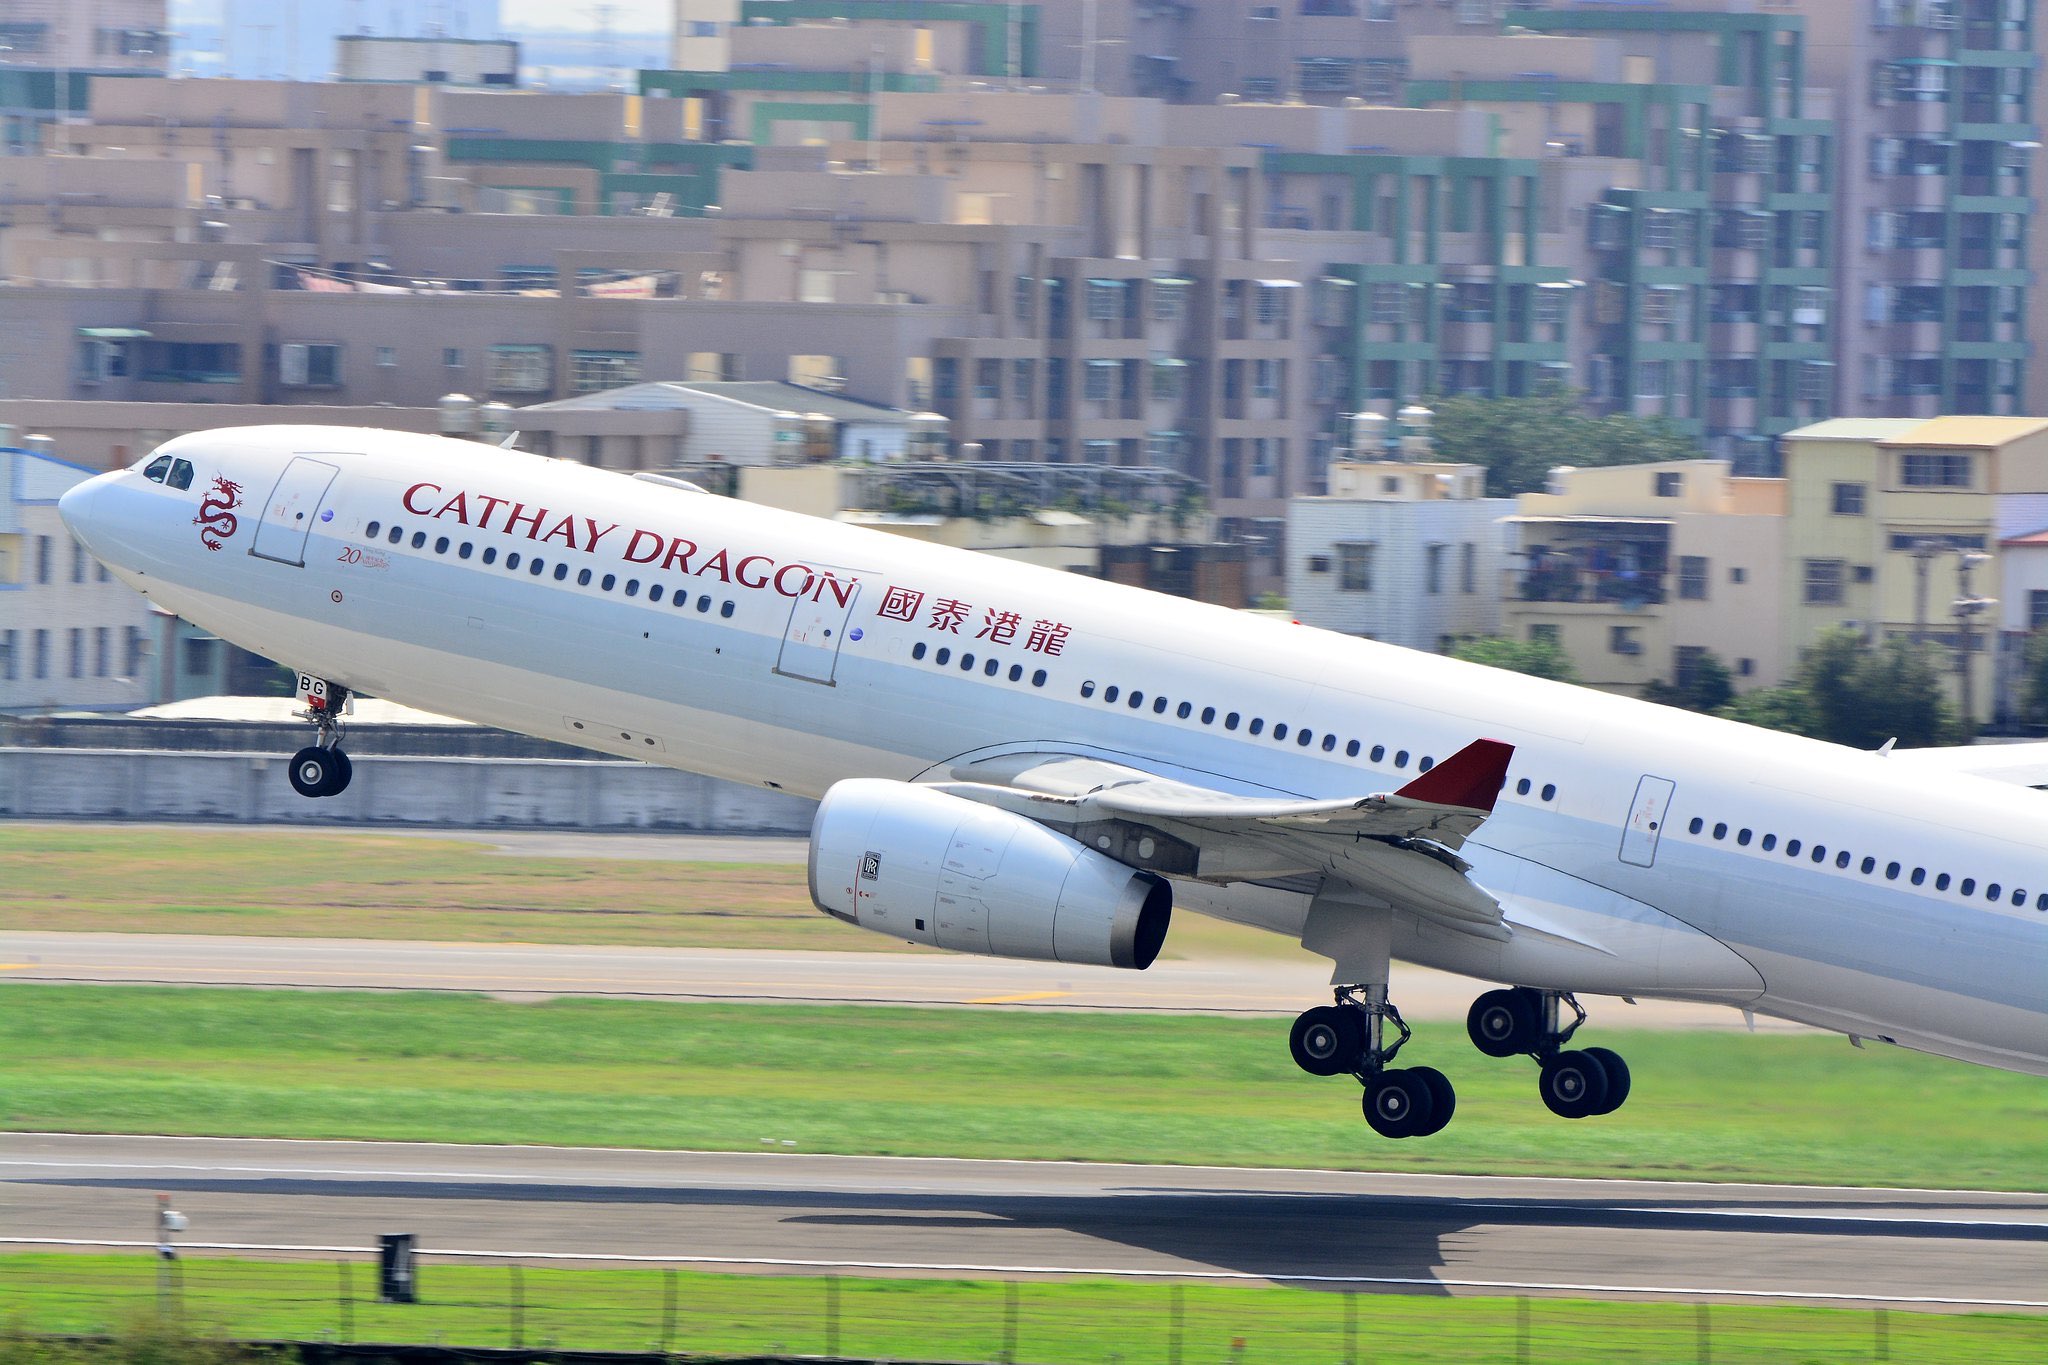 A Cathay Dragon jet takes off in 2017. A Cathay Dragon flight from Taiwan to Hong Kong was forced to make an emergency landing today after experiencing a technical issue with one engine. Photo via Flickr/Chung ChengYen.